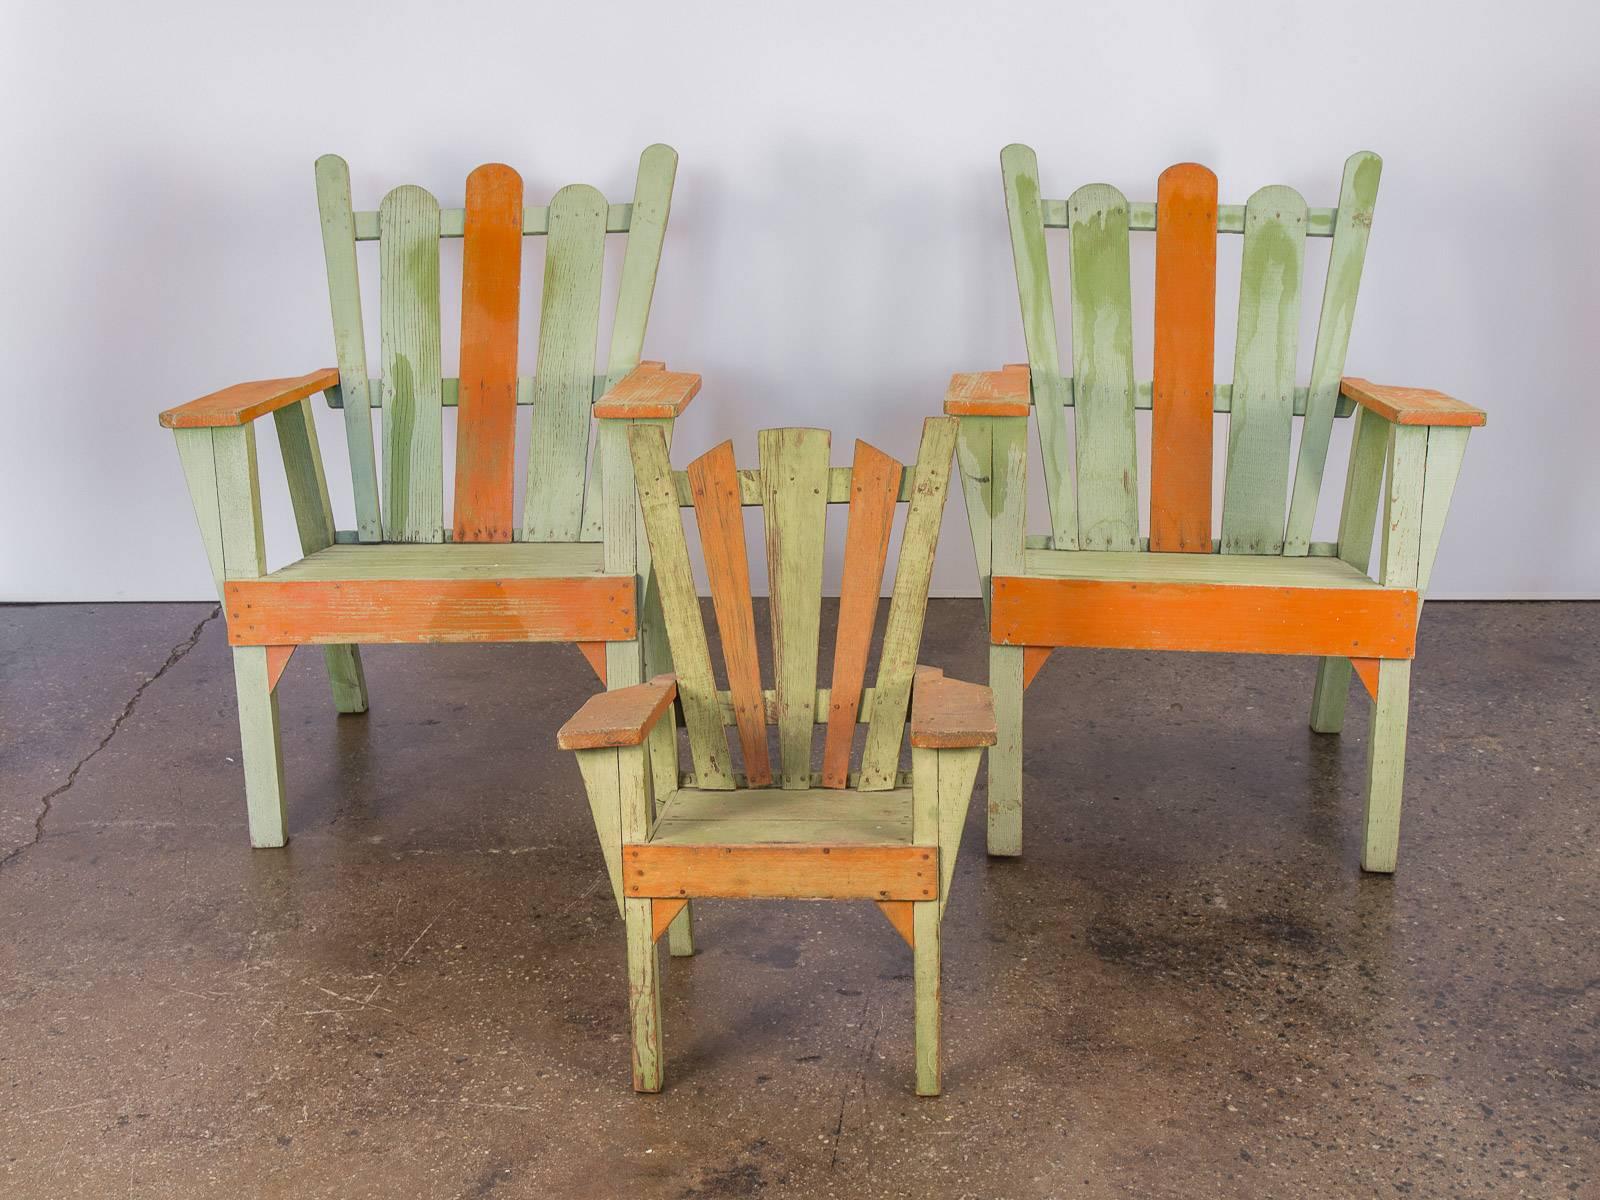 Set of three 1960s vintage Adirondack lounge chairs. Consists of two larger chairs and one adorable child’s sized chair. The paint and wood has age-appropriate wear, but are sturdy without waver. Stained in a colorful light moss-green and orange,